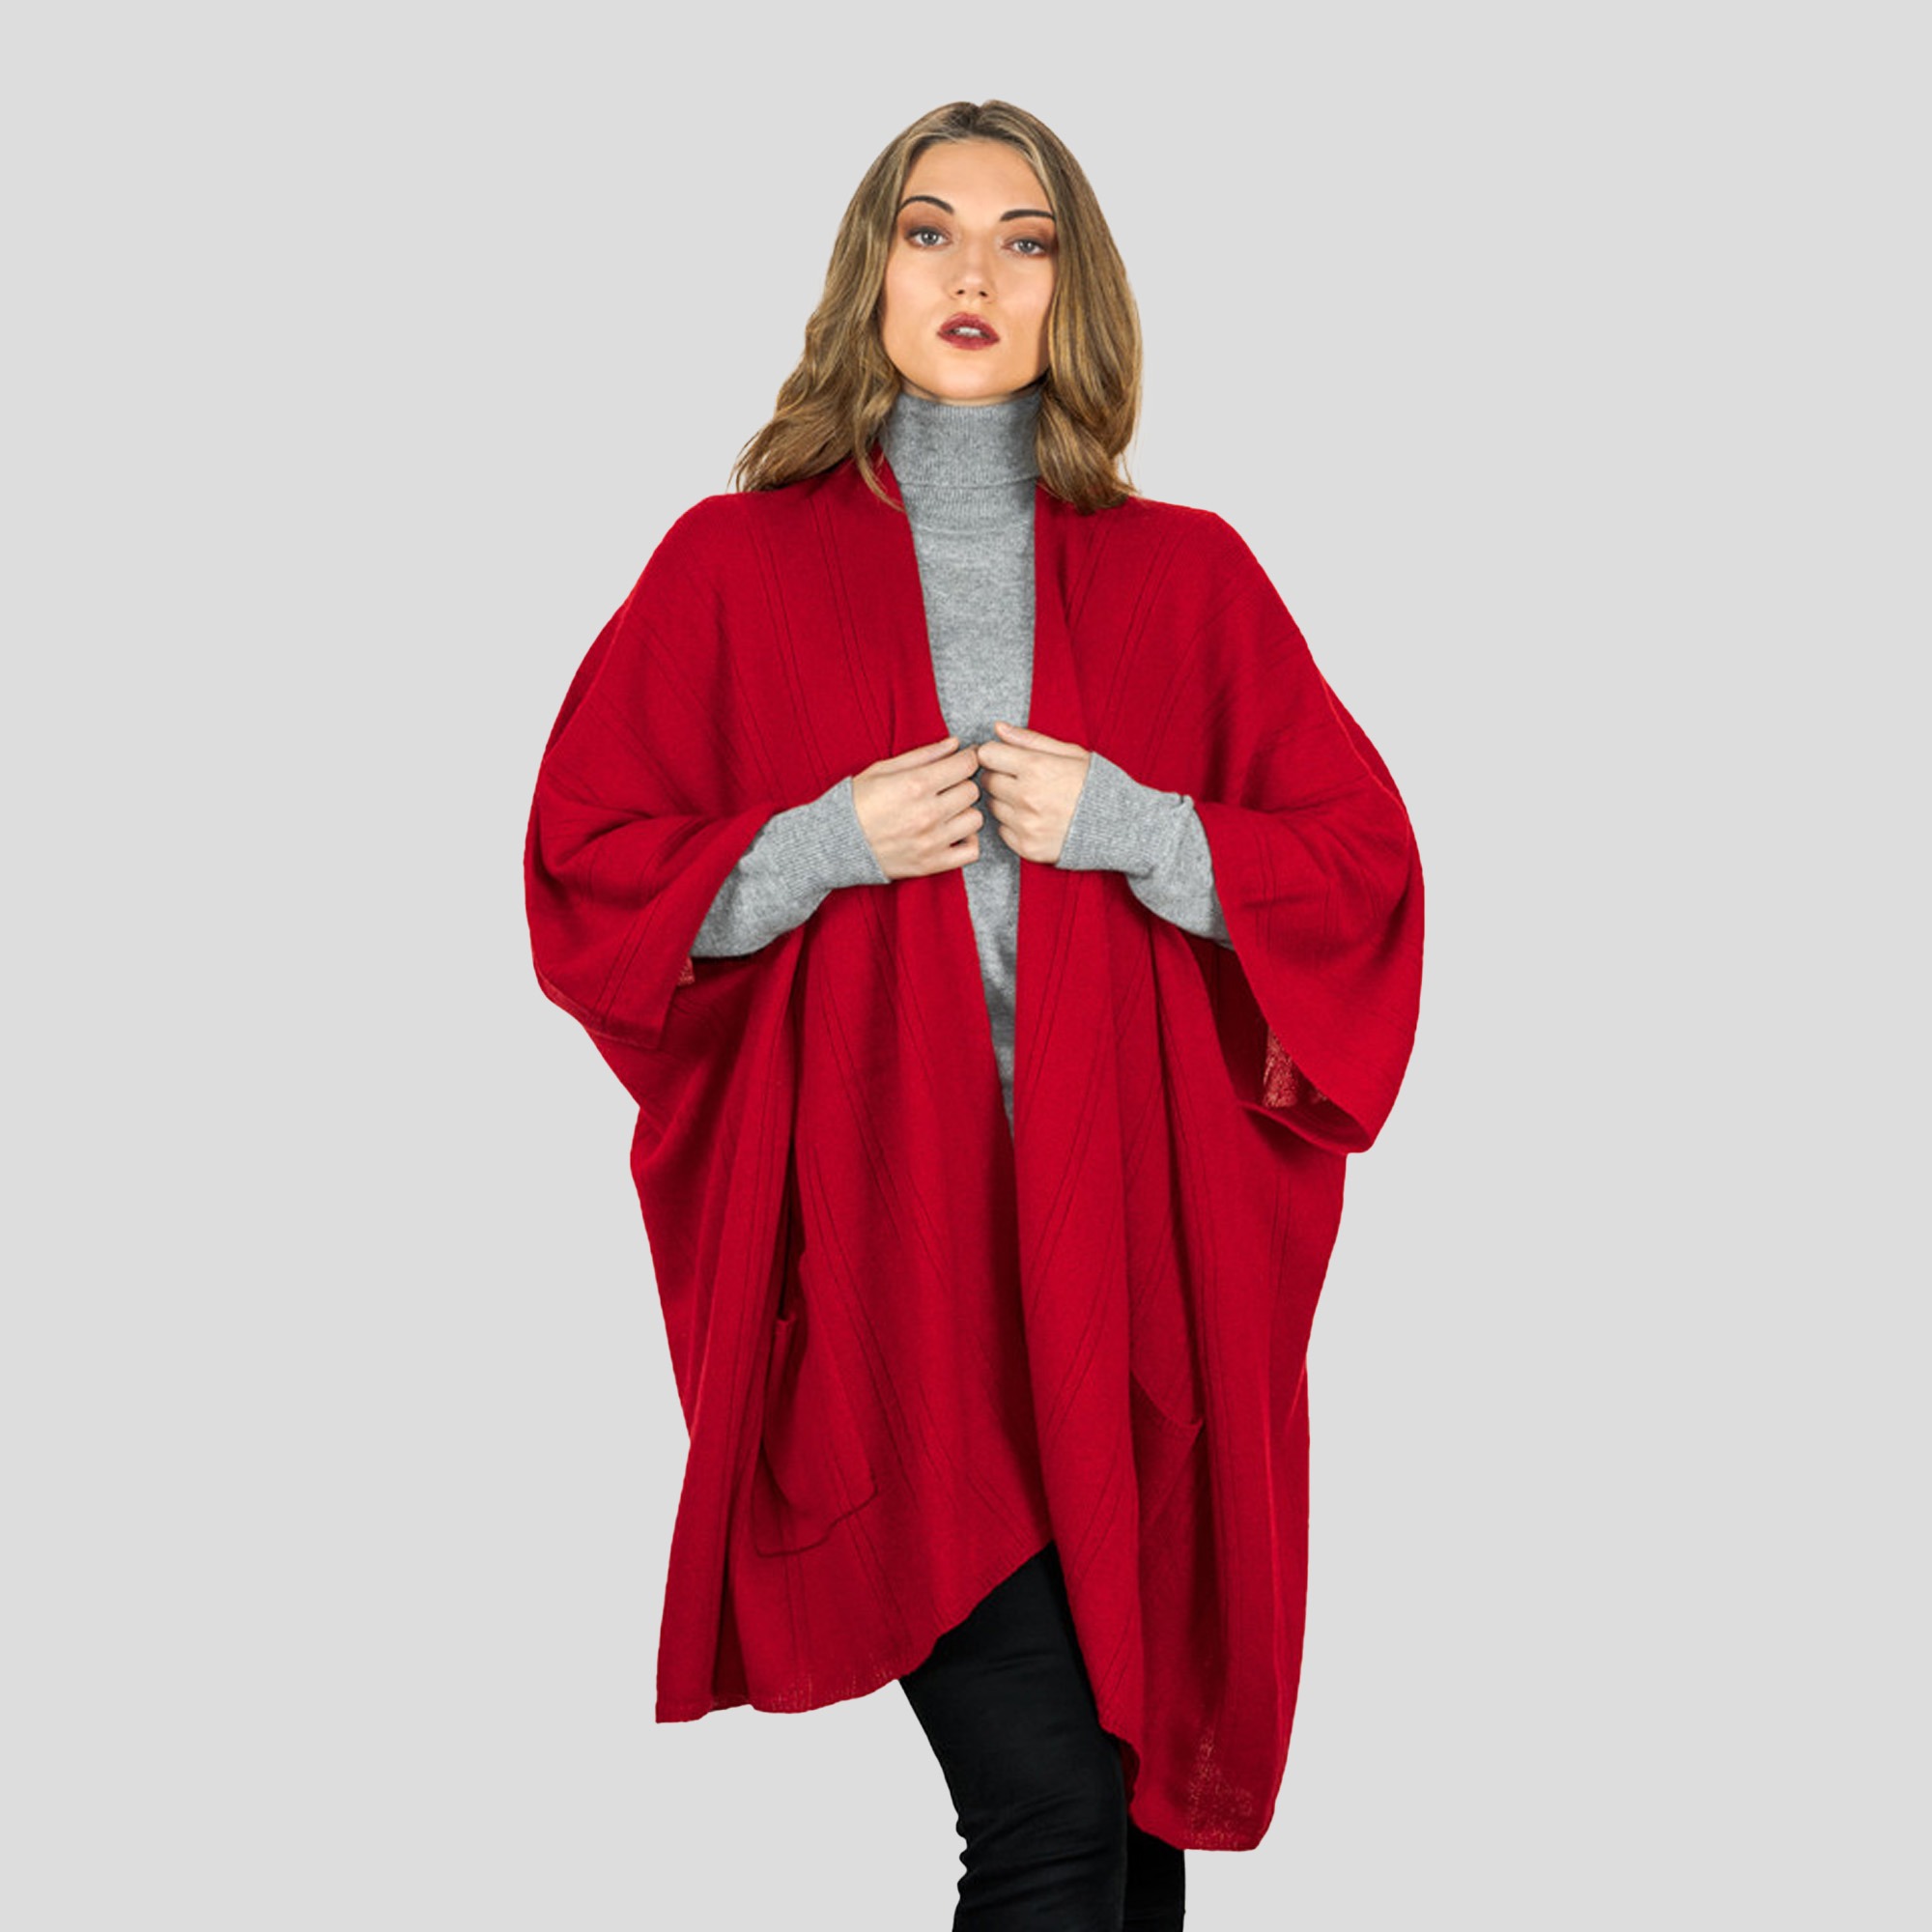 Grey- Lona Scott Cashmere Cape with Pockets, Red 3